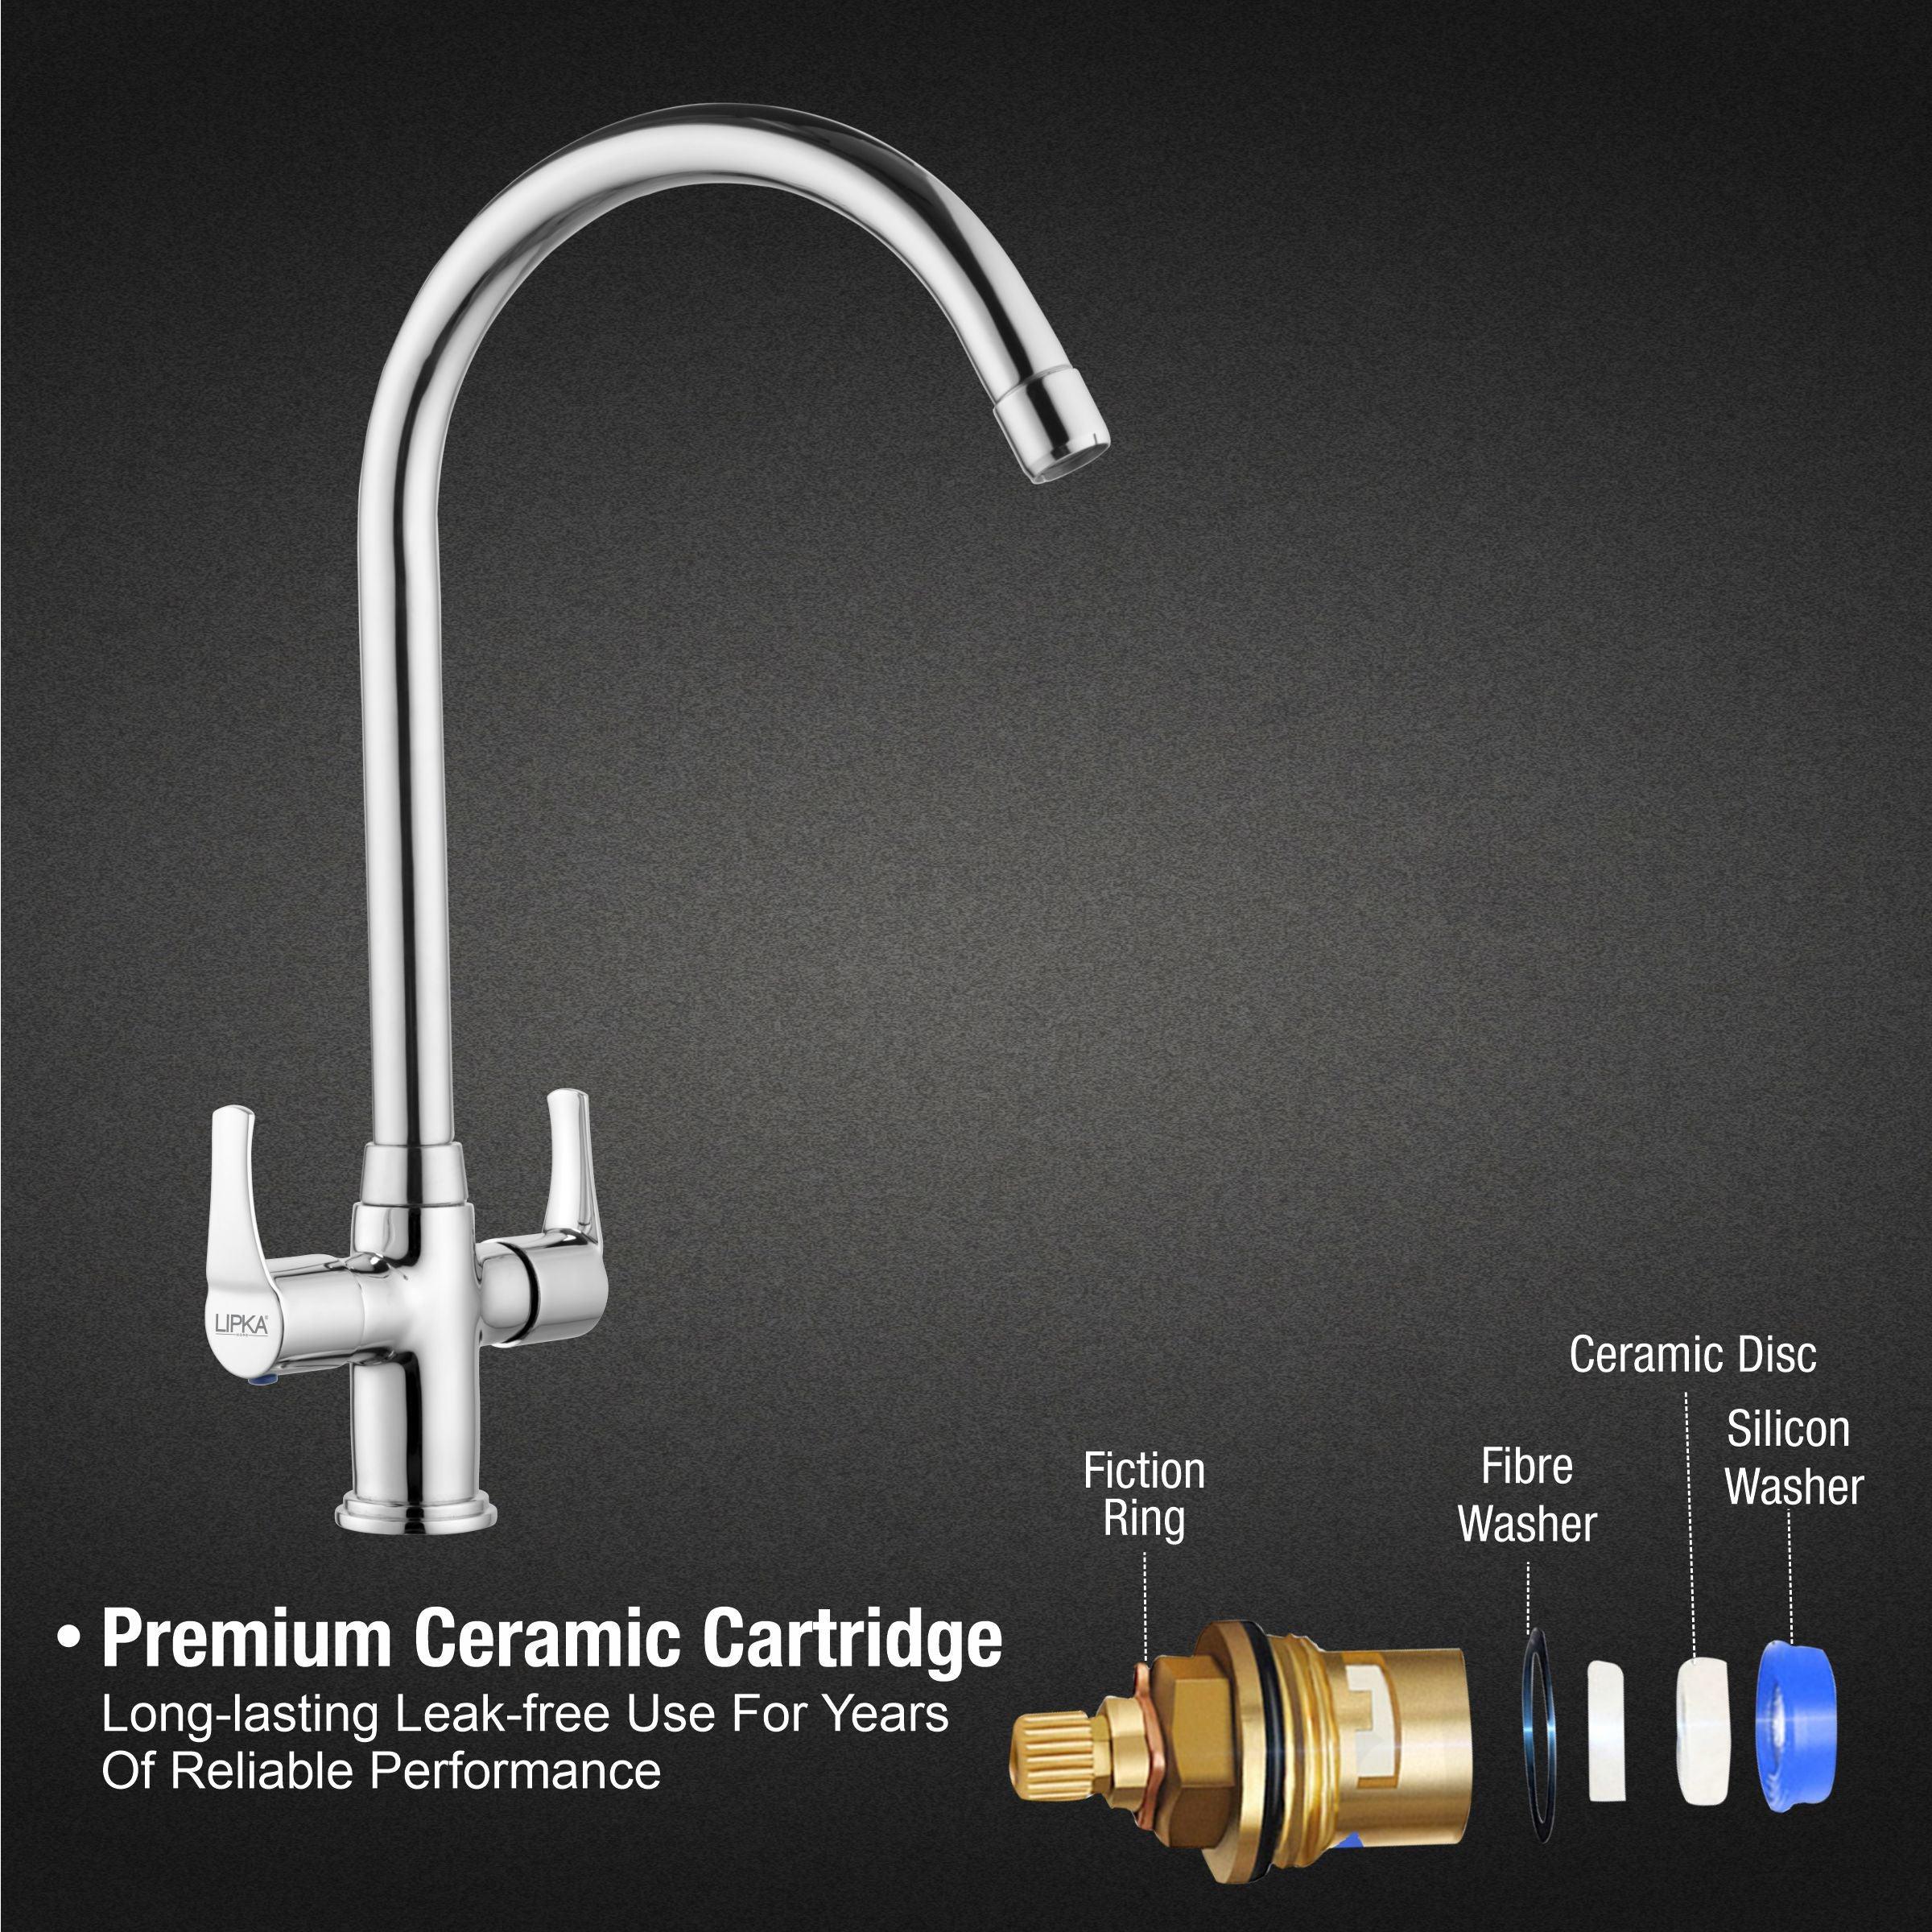 Coral Centre Hole Basin Mixer Brass Faucet with Round Swivel Spout (20 Inches) - LIPKA - Lipka Home